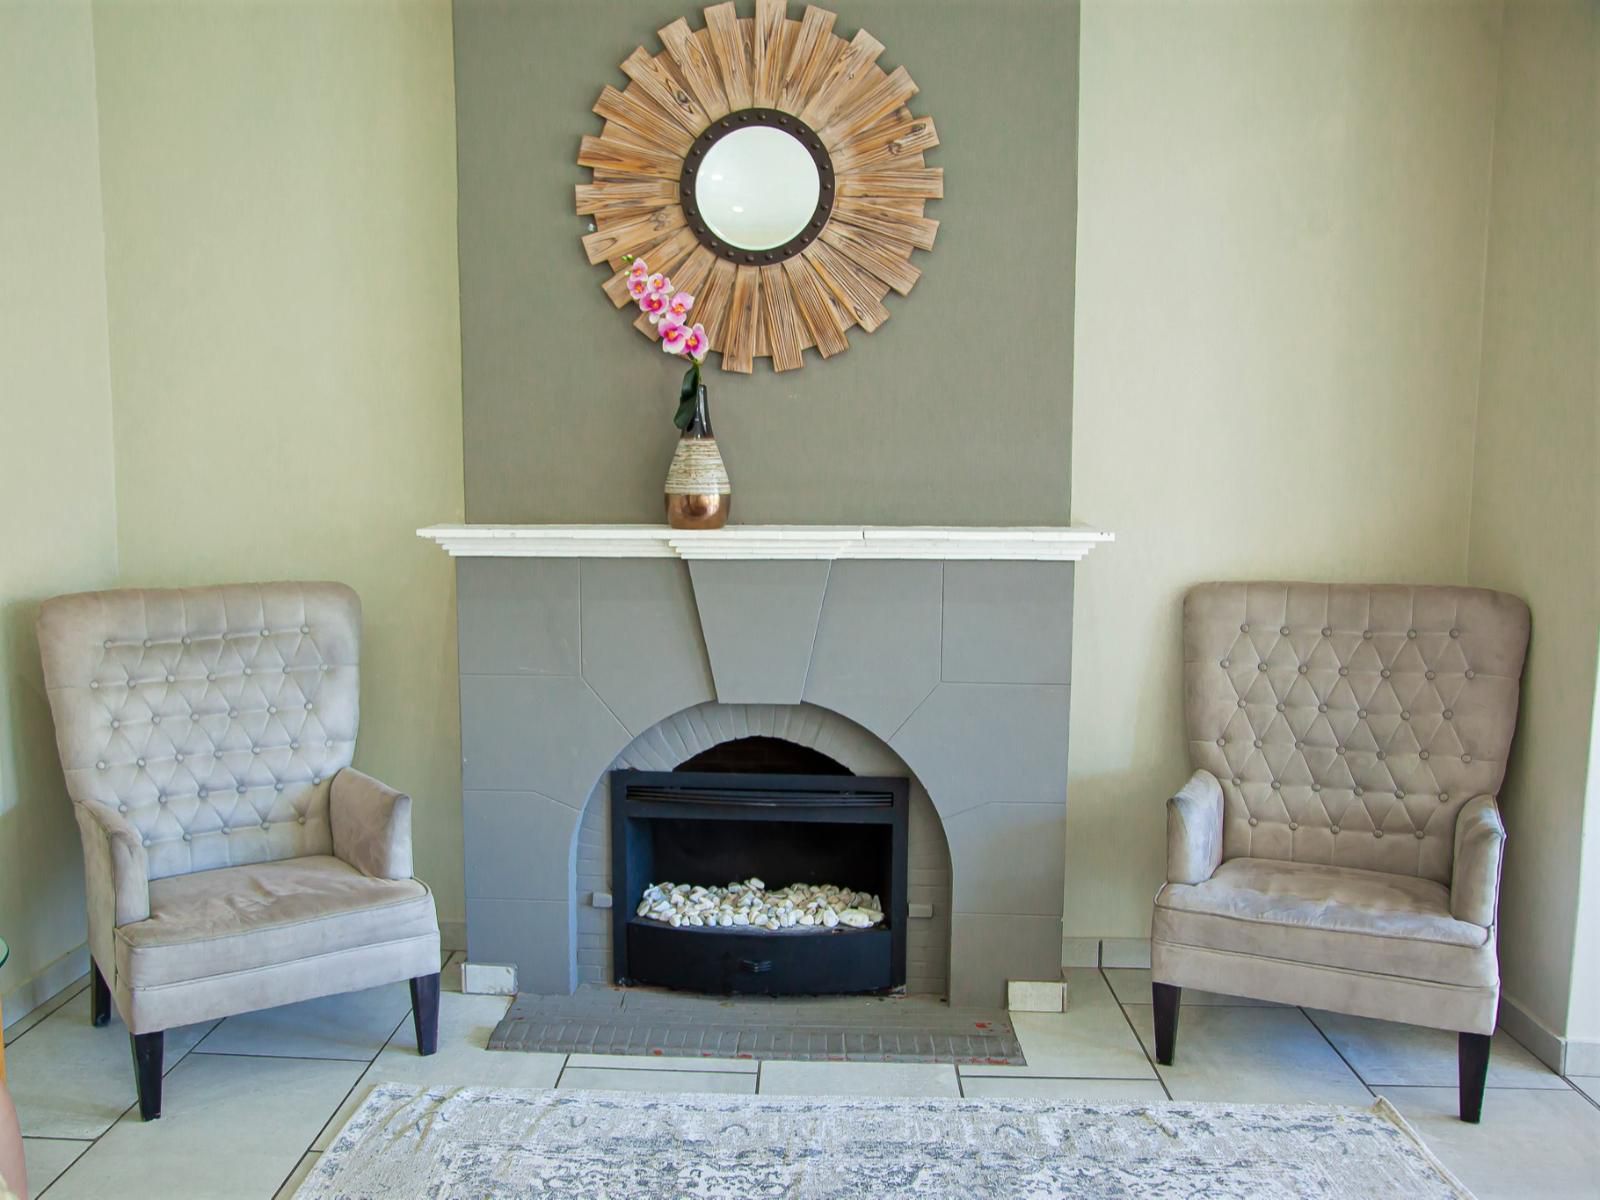 Pamba On 131 Guest House Rondebosch East Cape Town Western Cape South Africa Unsaturated, Fireplace, Living Room